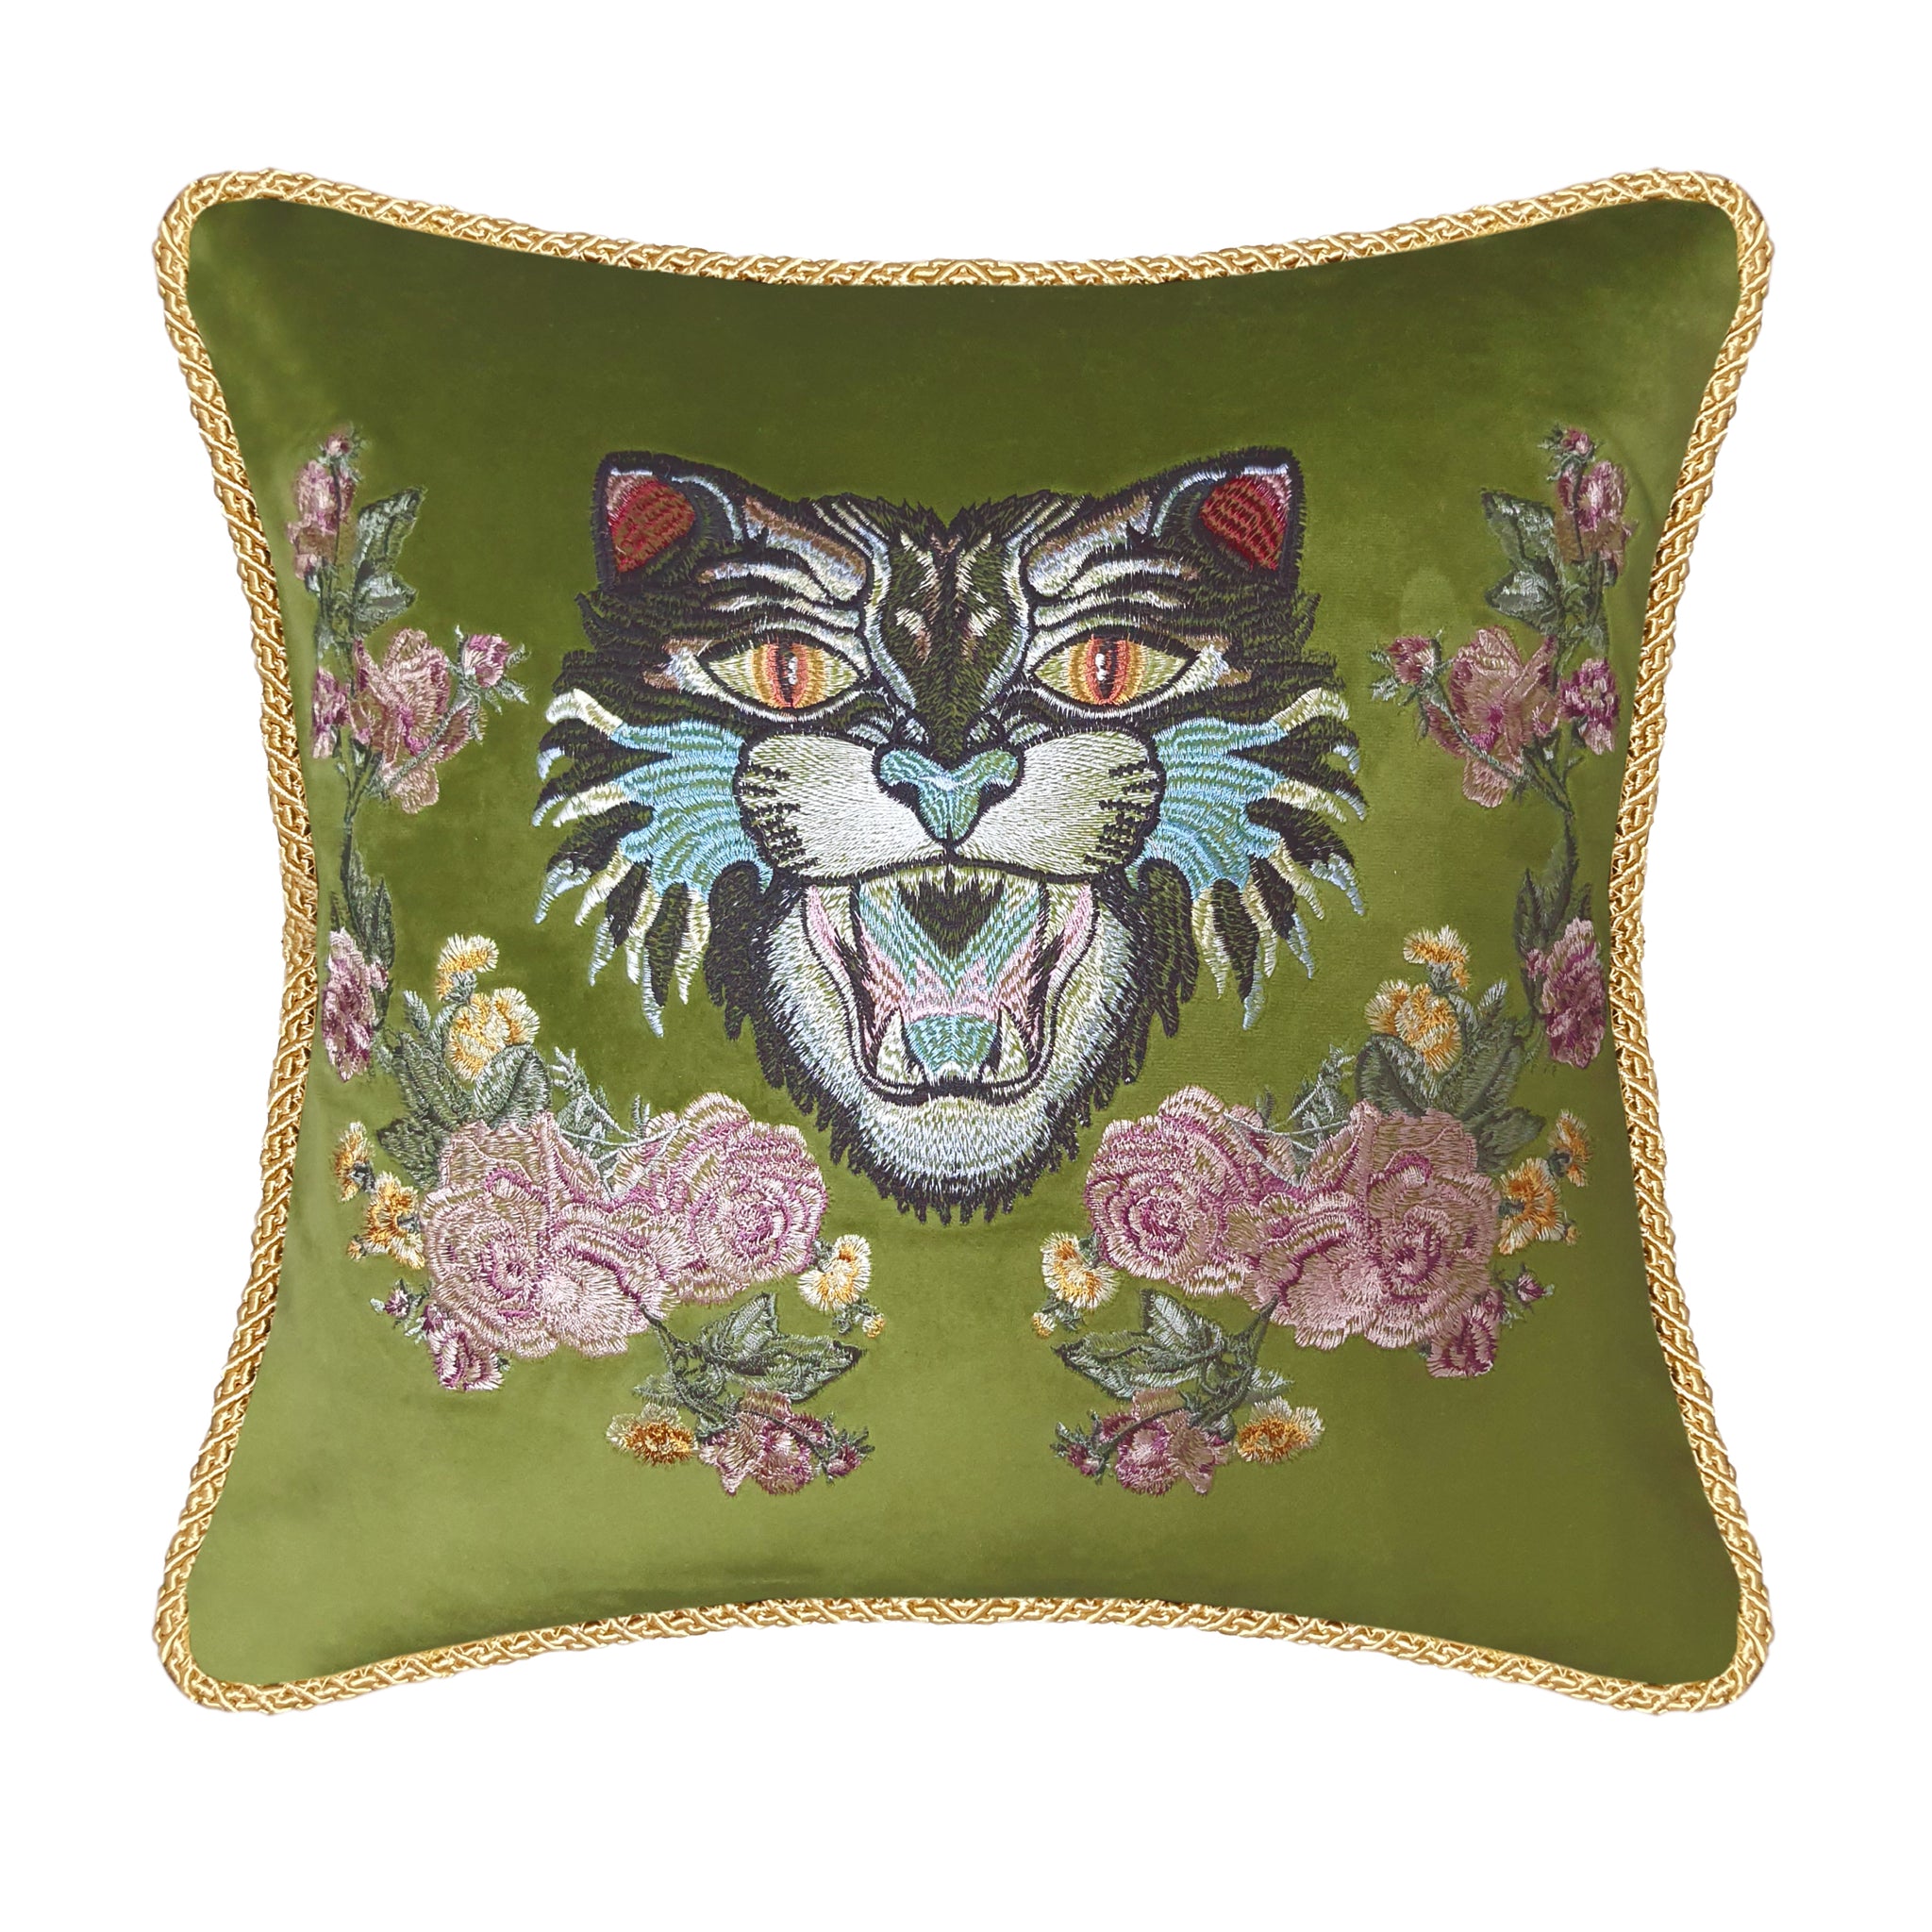 Velvet Cushion Cover Angry Cat Embroidery Decorative Pillowcase Modern Home Decor Throw Pillow for Sofa Chair Living Room 45x45 cm